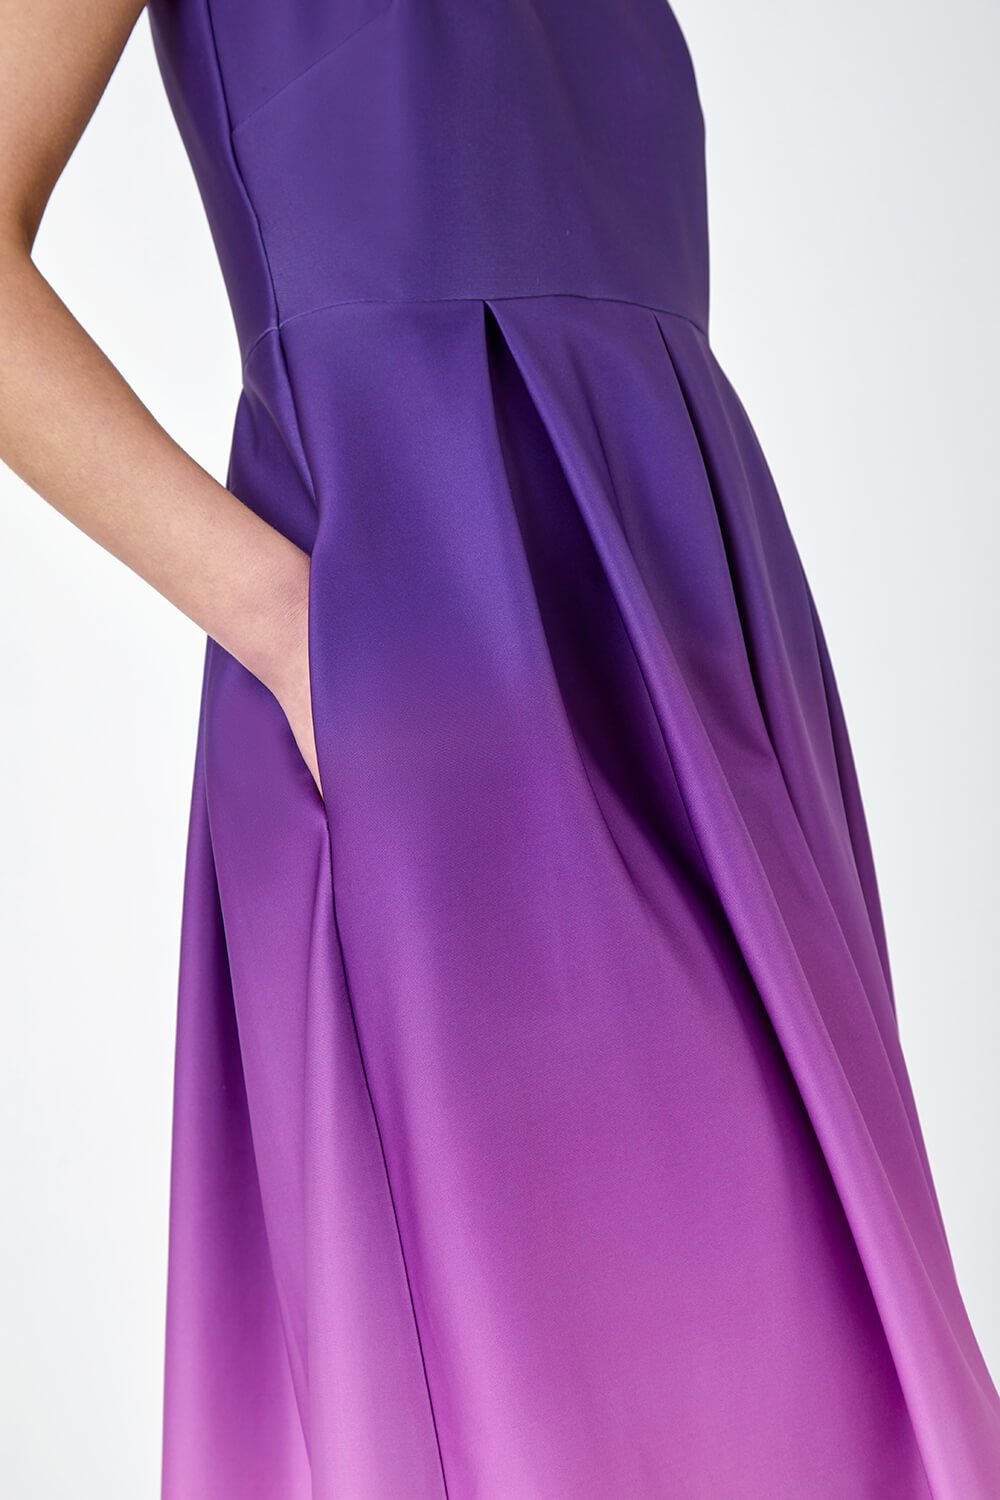 Purple Ombre Pleated Luxe Stretch Midi Dress, Image 5 of 5